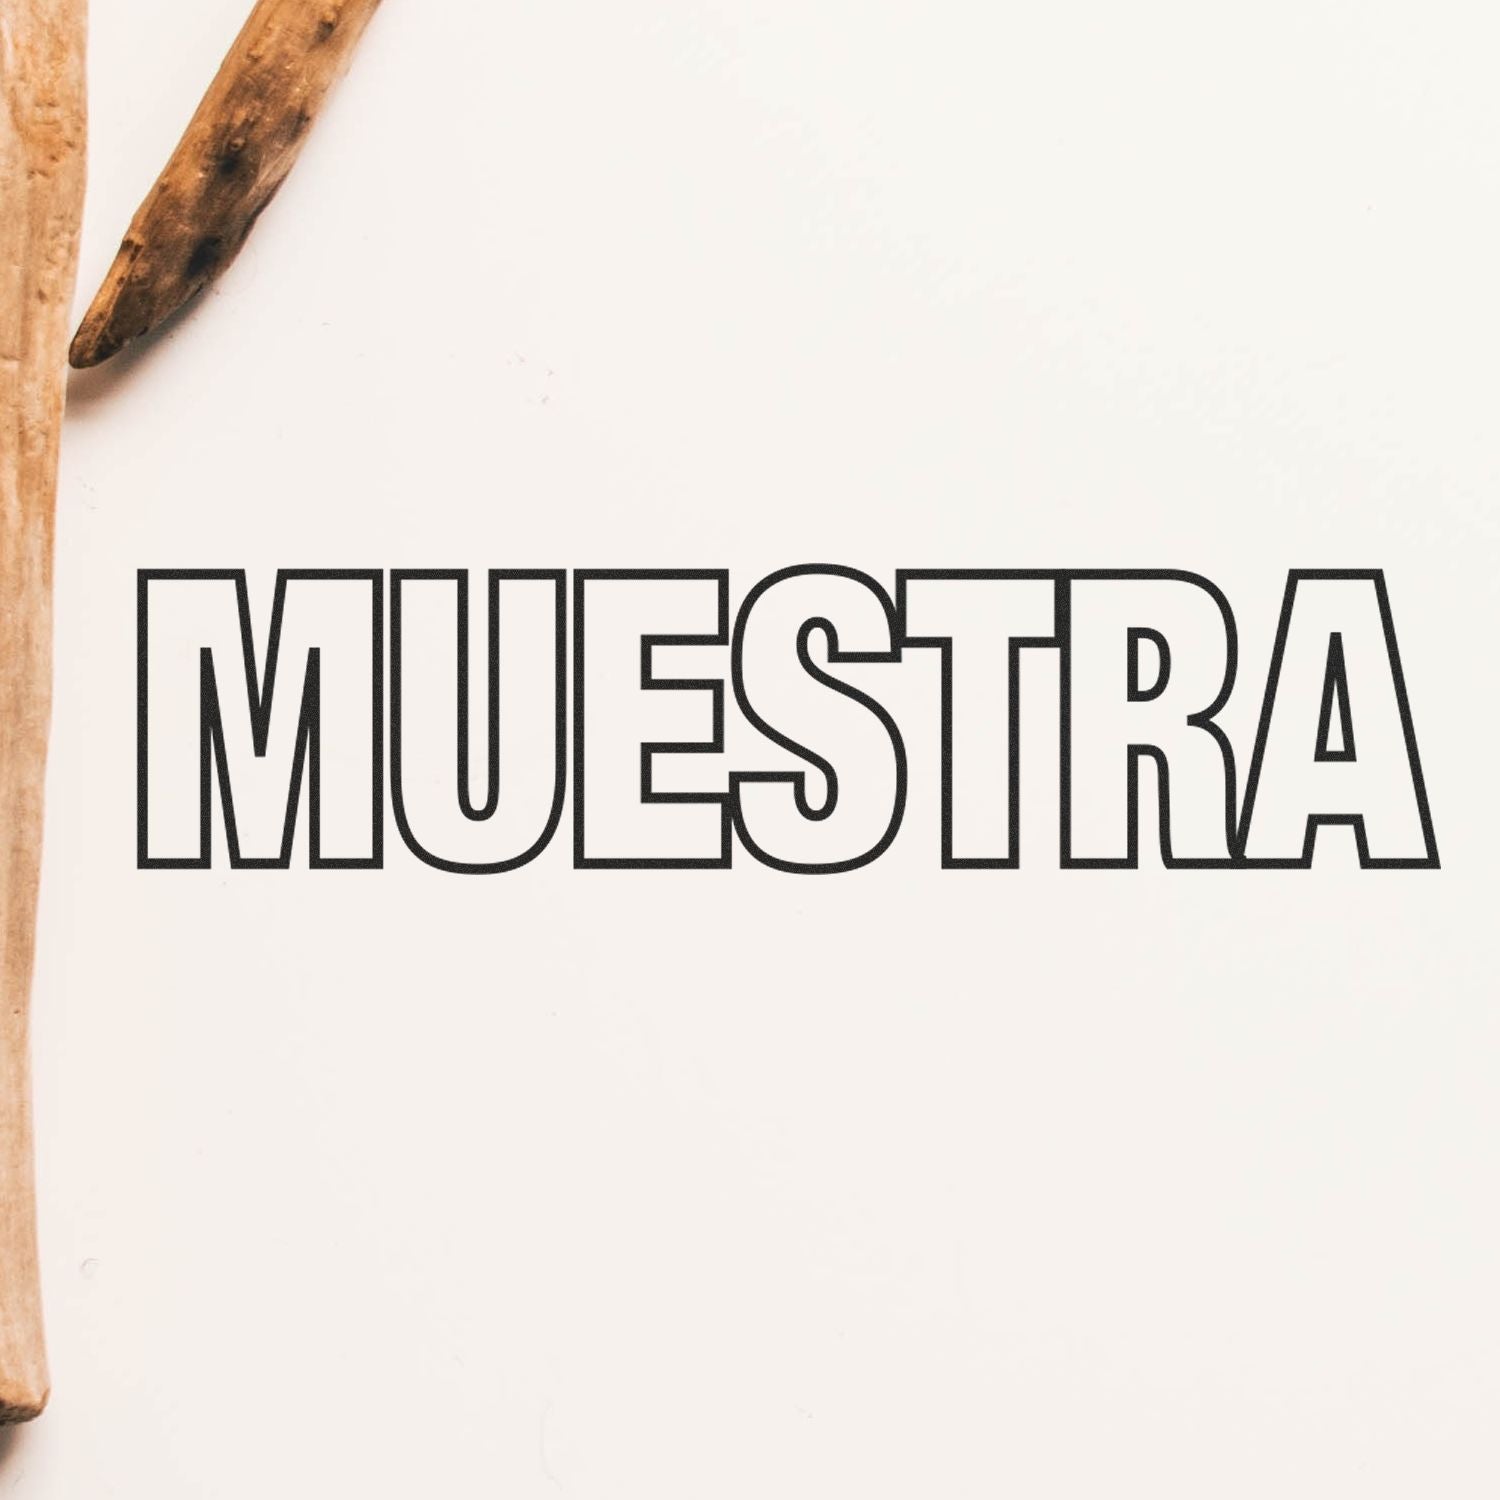 Muestra Rubber Stamp Lifestyle Photo